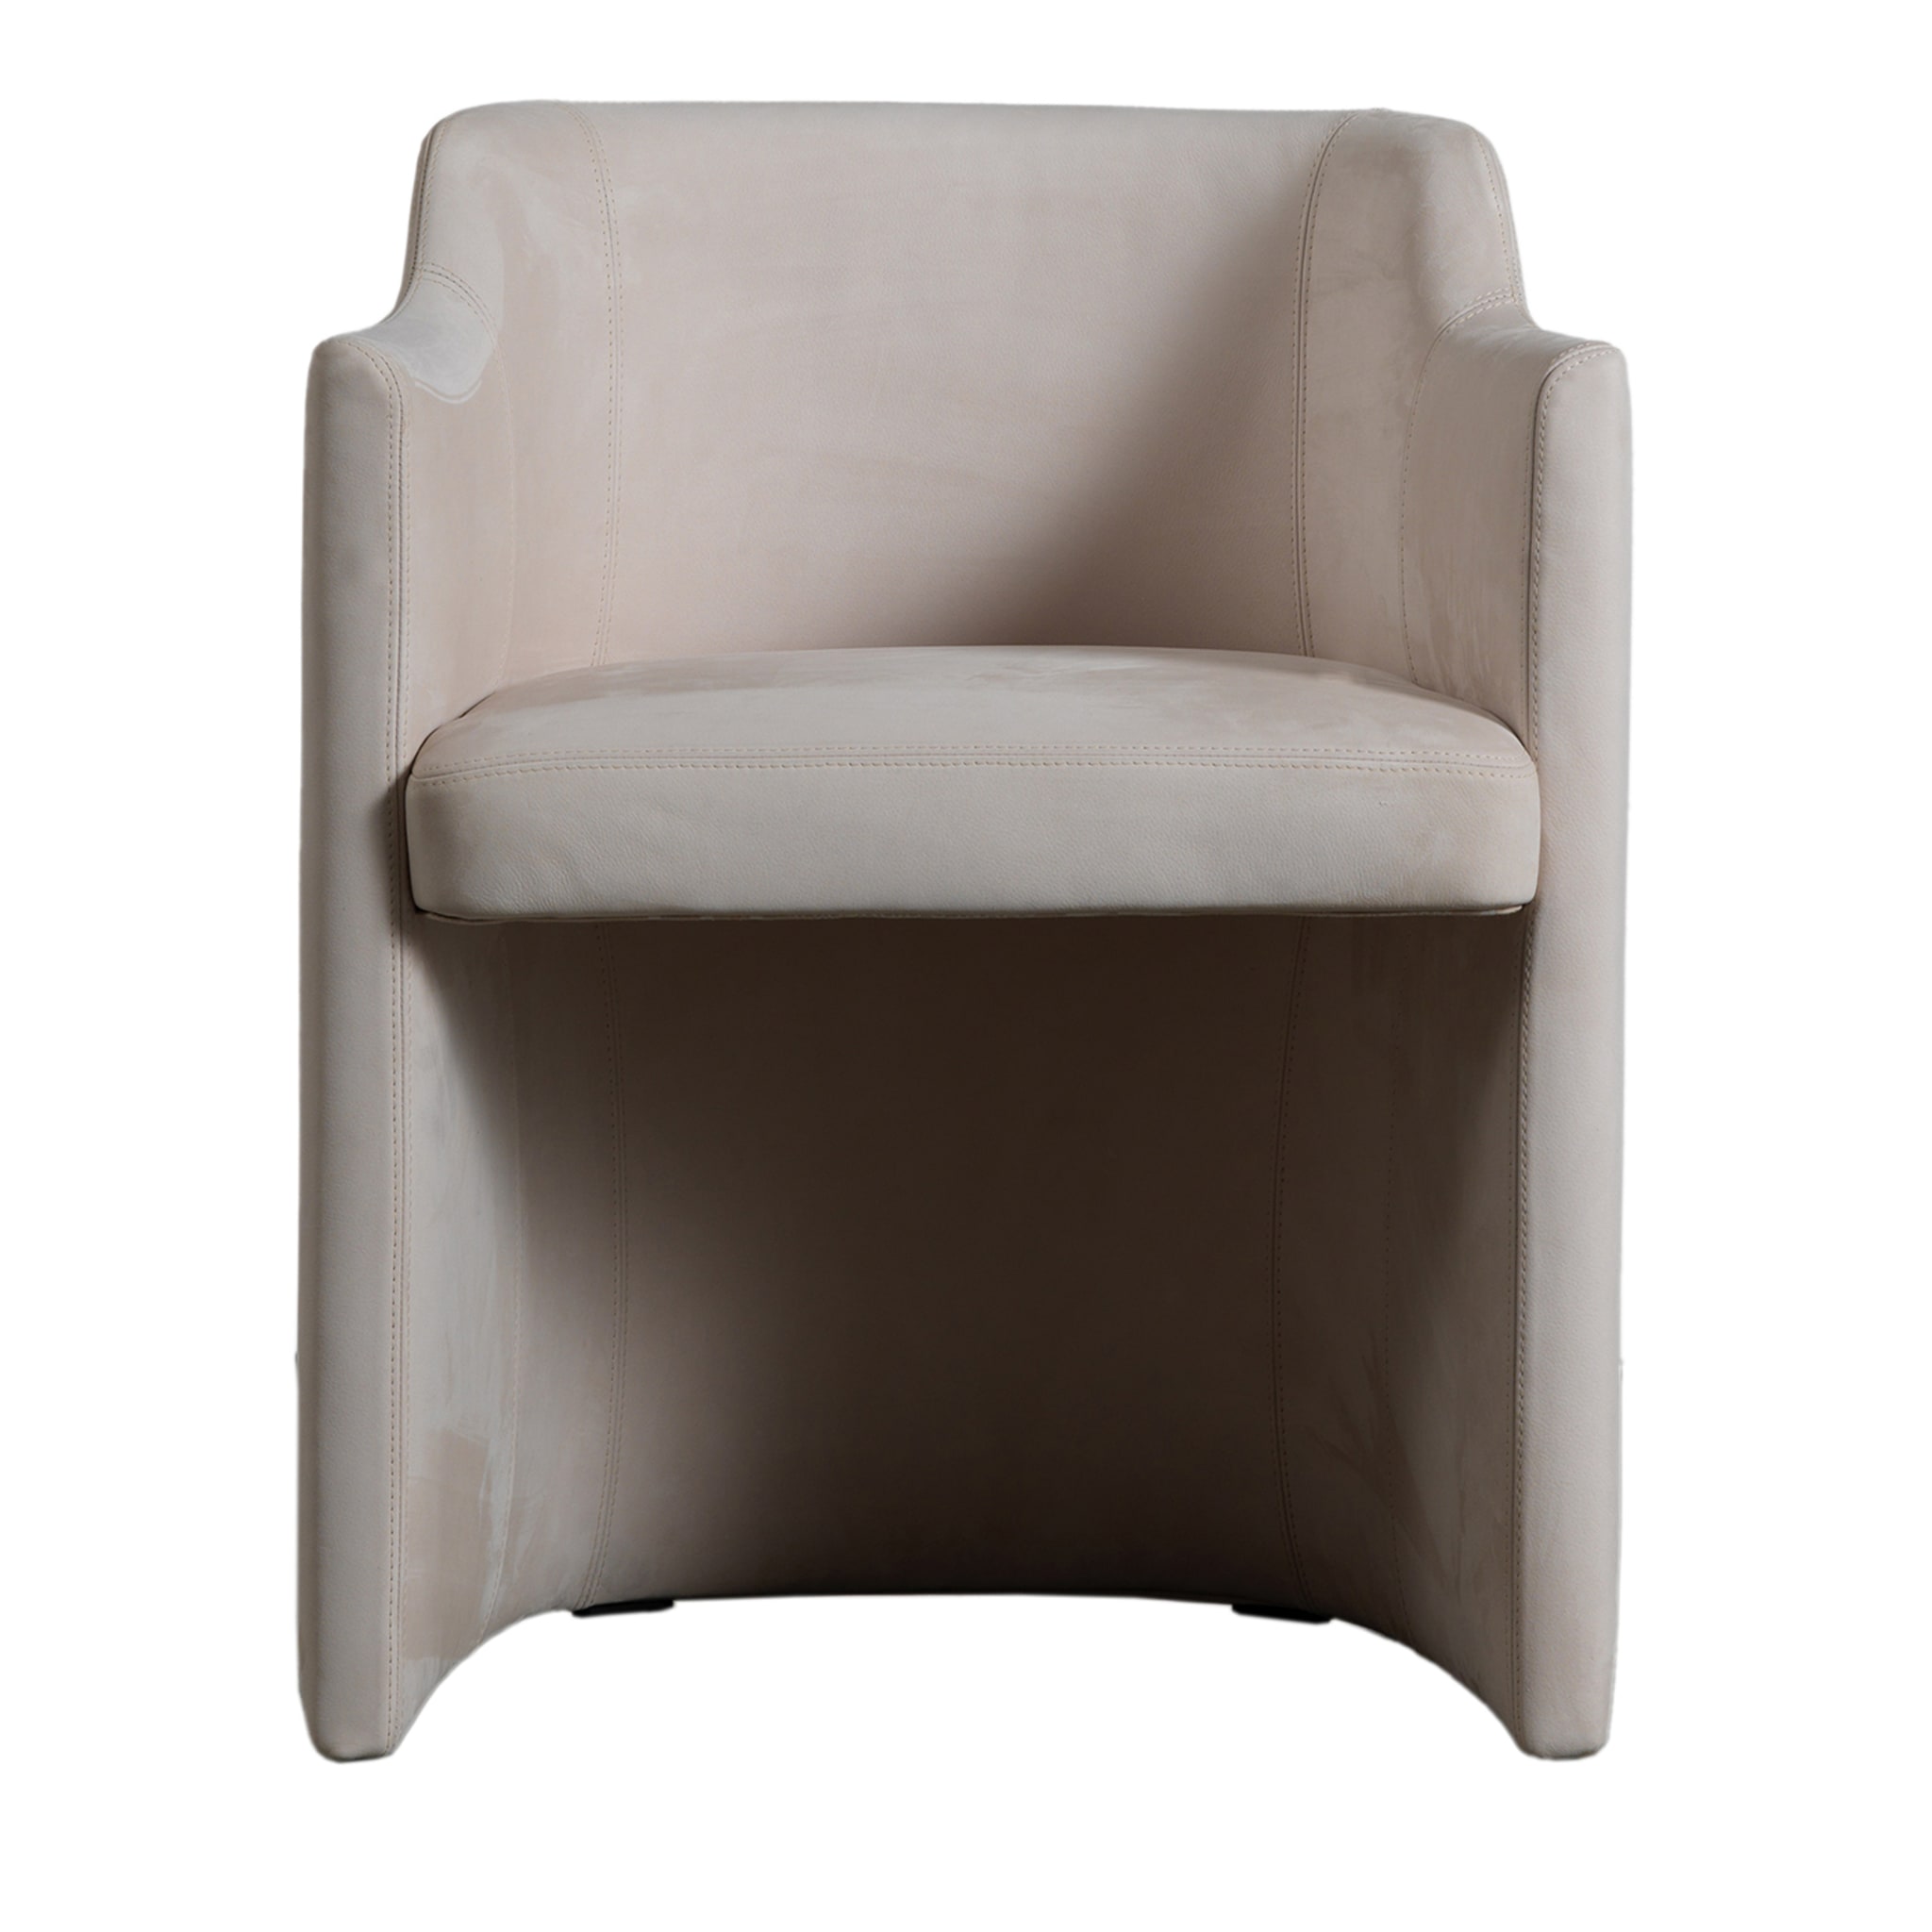 Charmant Ivory Padded Armchair - Main view